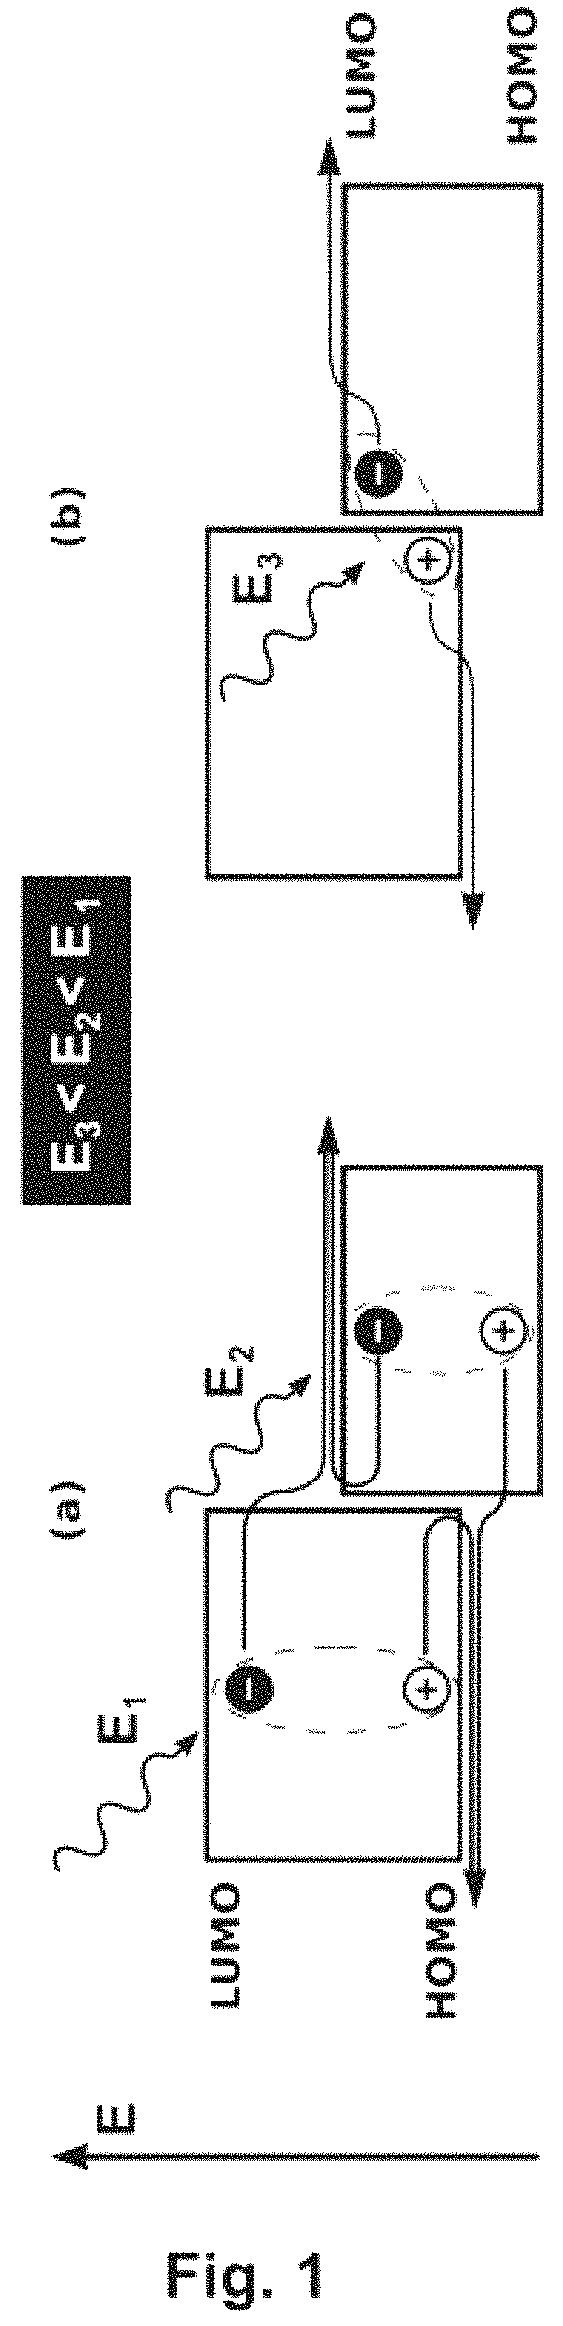 Method for detecting and converting infrared electromagnetic radiation